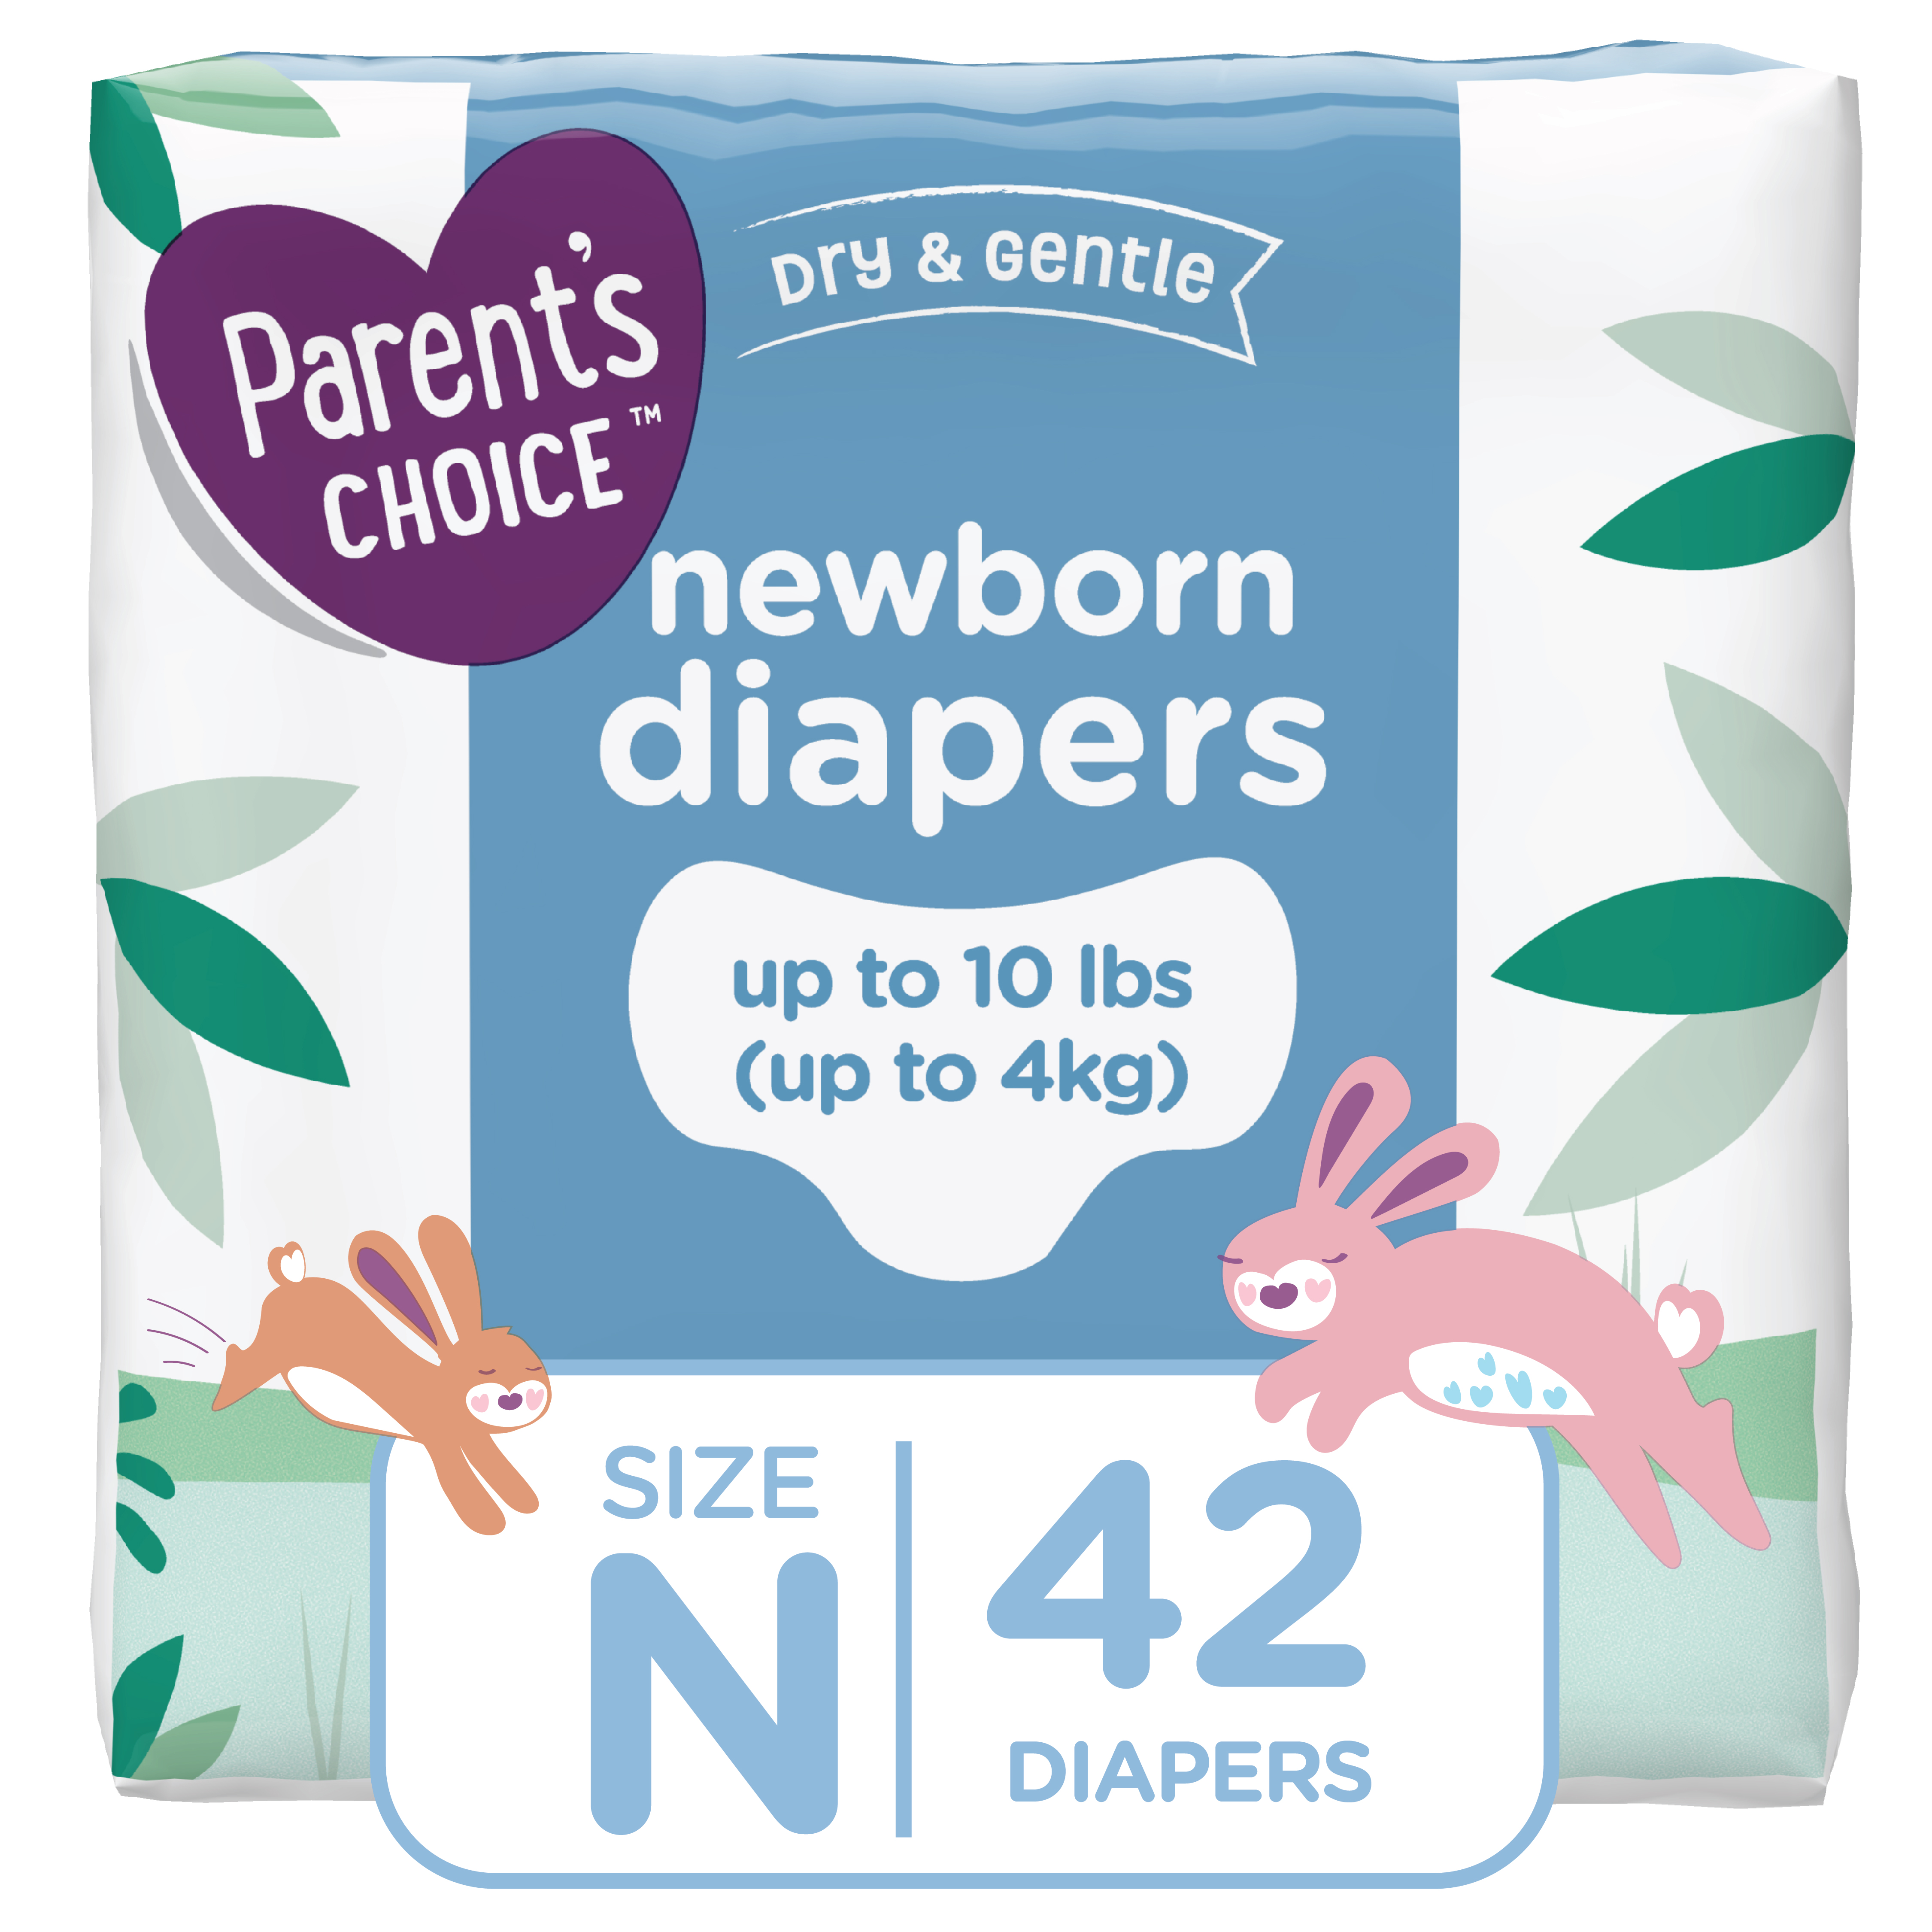 Parent's Choice Diapers (Choose Your Size & Count) - image 1 of 11